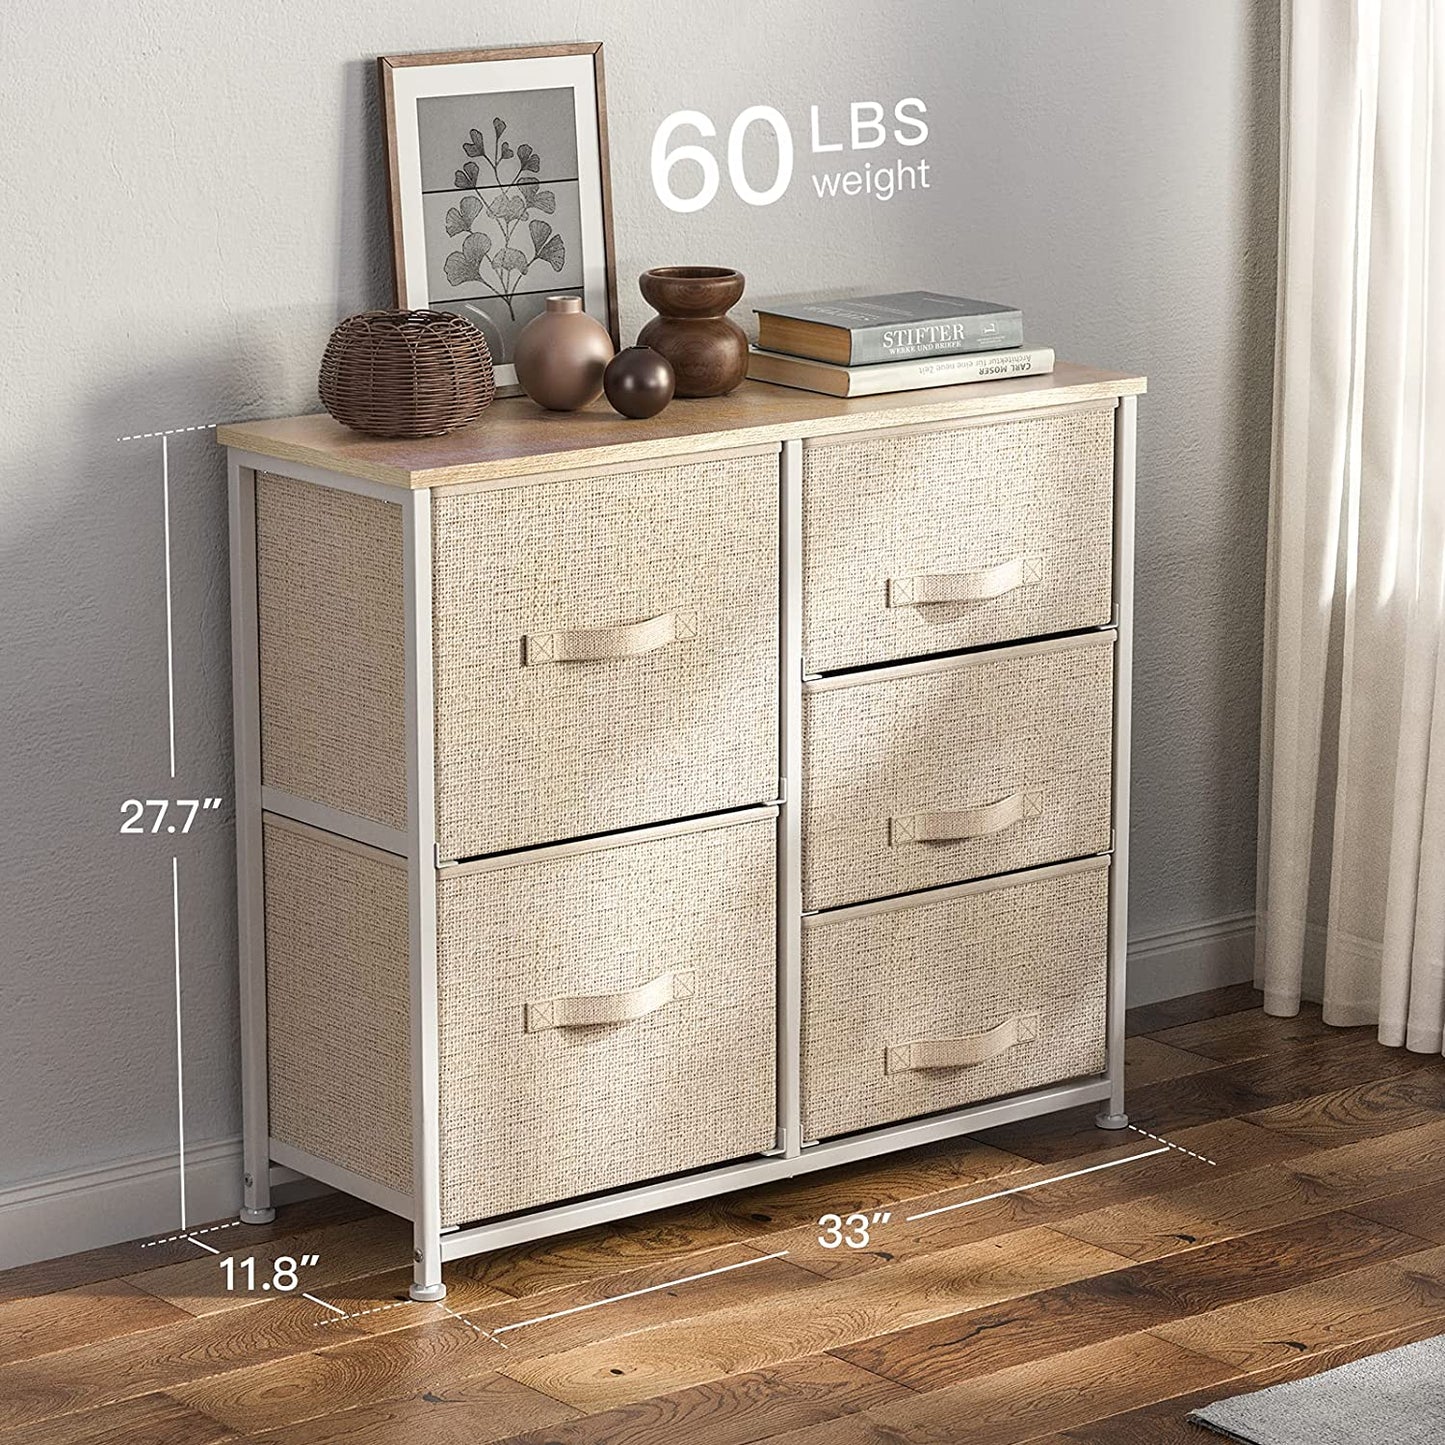 Chest of Drawers, Fabric Storage Drawers with Wood Top and Large Storage Space, Easy to Install Room Organizer, Vertical Chest of 5 Drawers Bedroom, Living Room, Nursery Room, Hallway, Etc